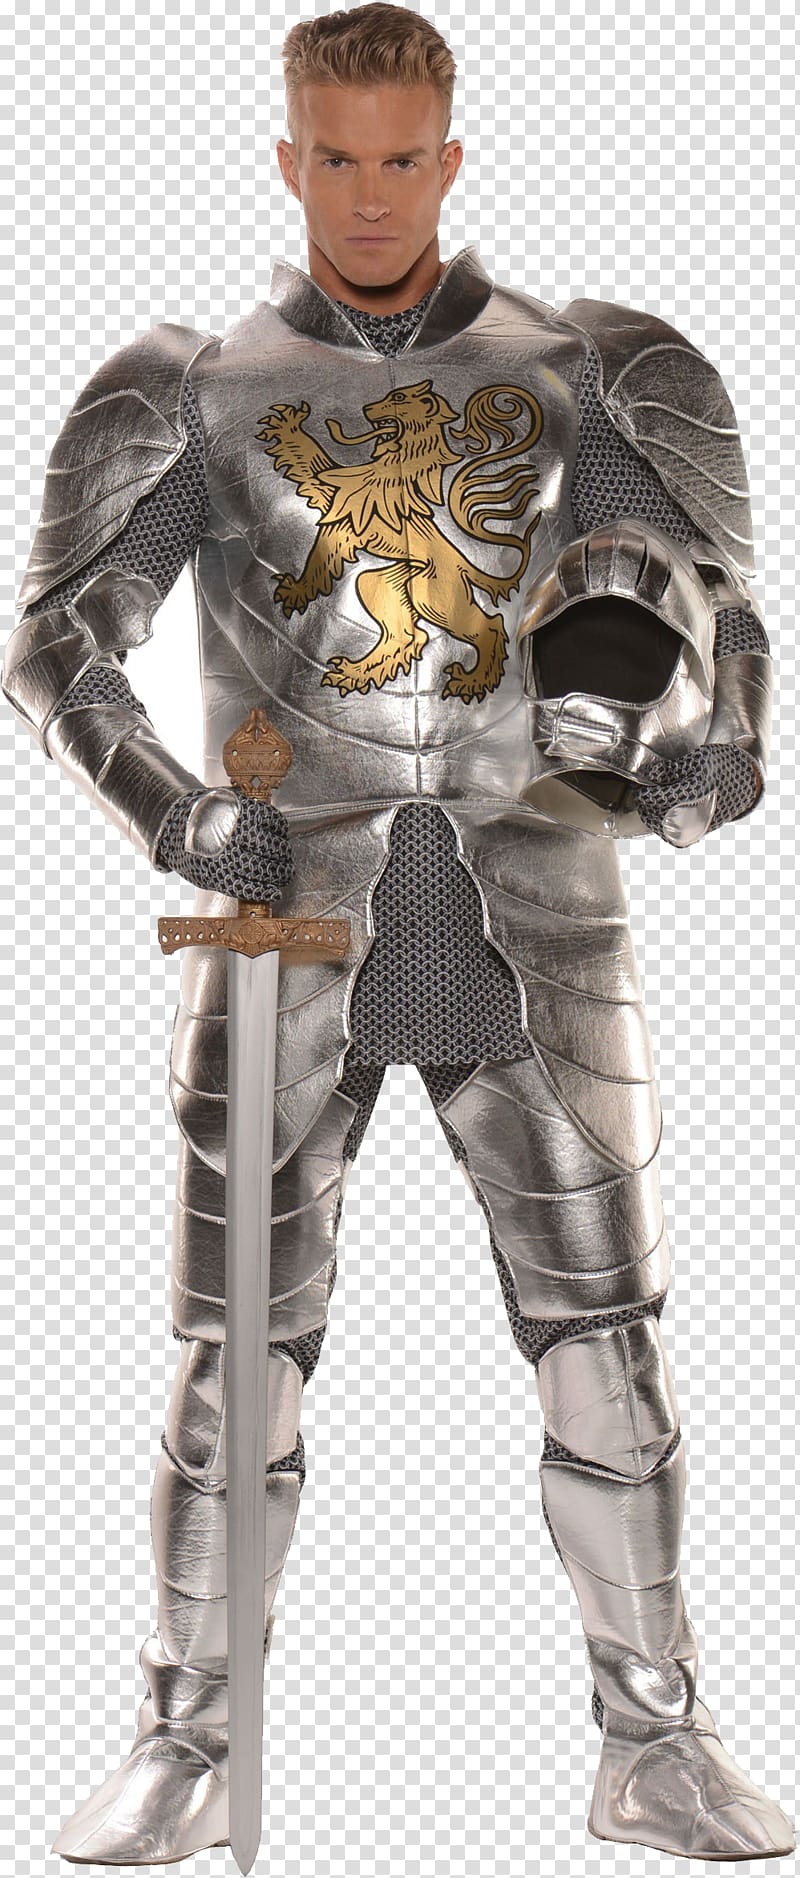 Middle Ages Costume Knight-errant Clothing, Medival knight transparent background PNG clipart